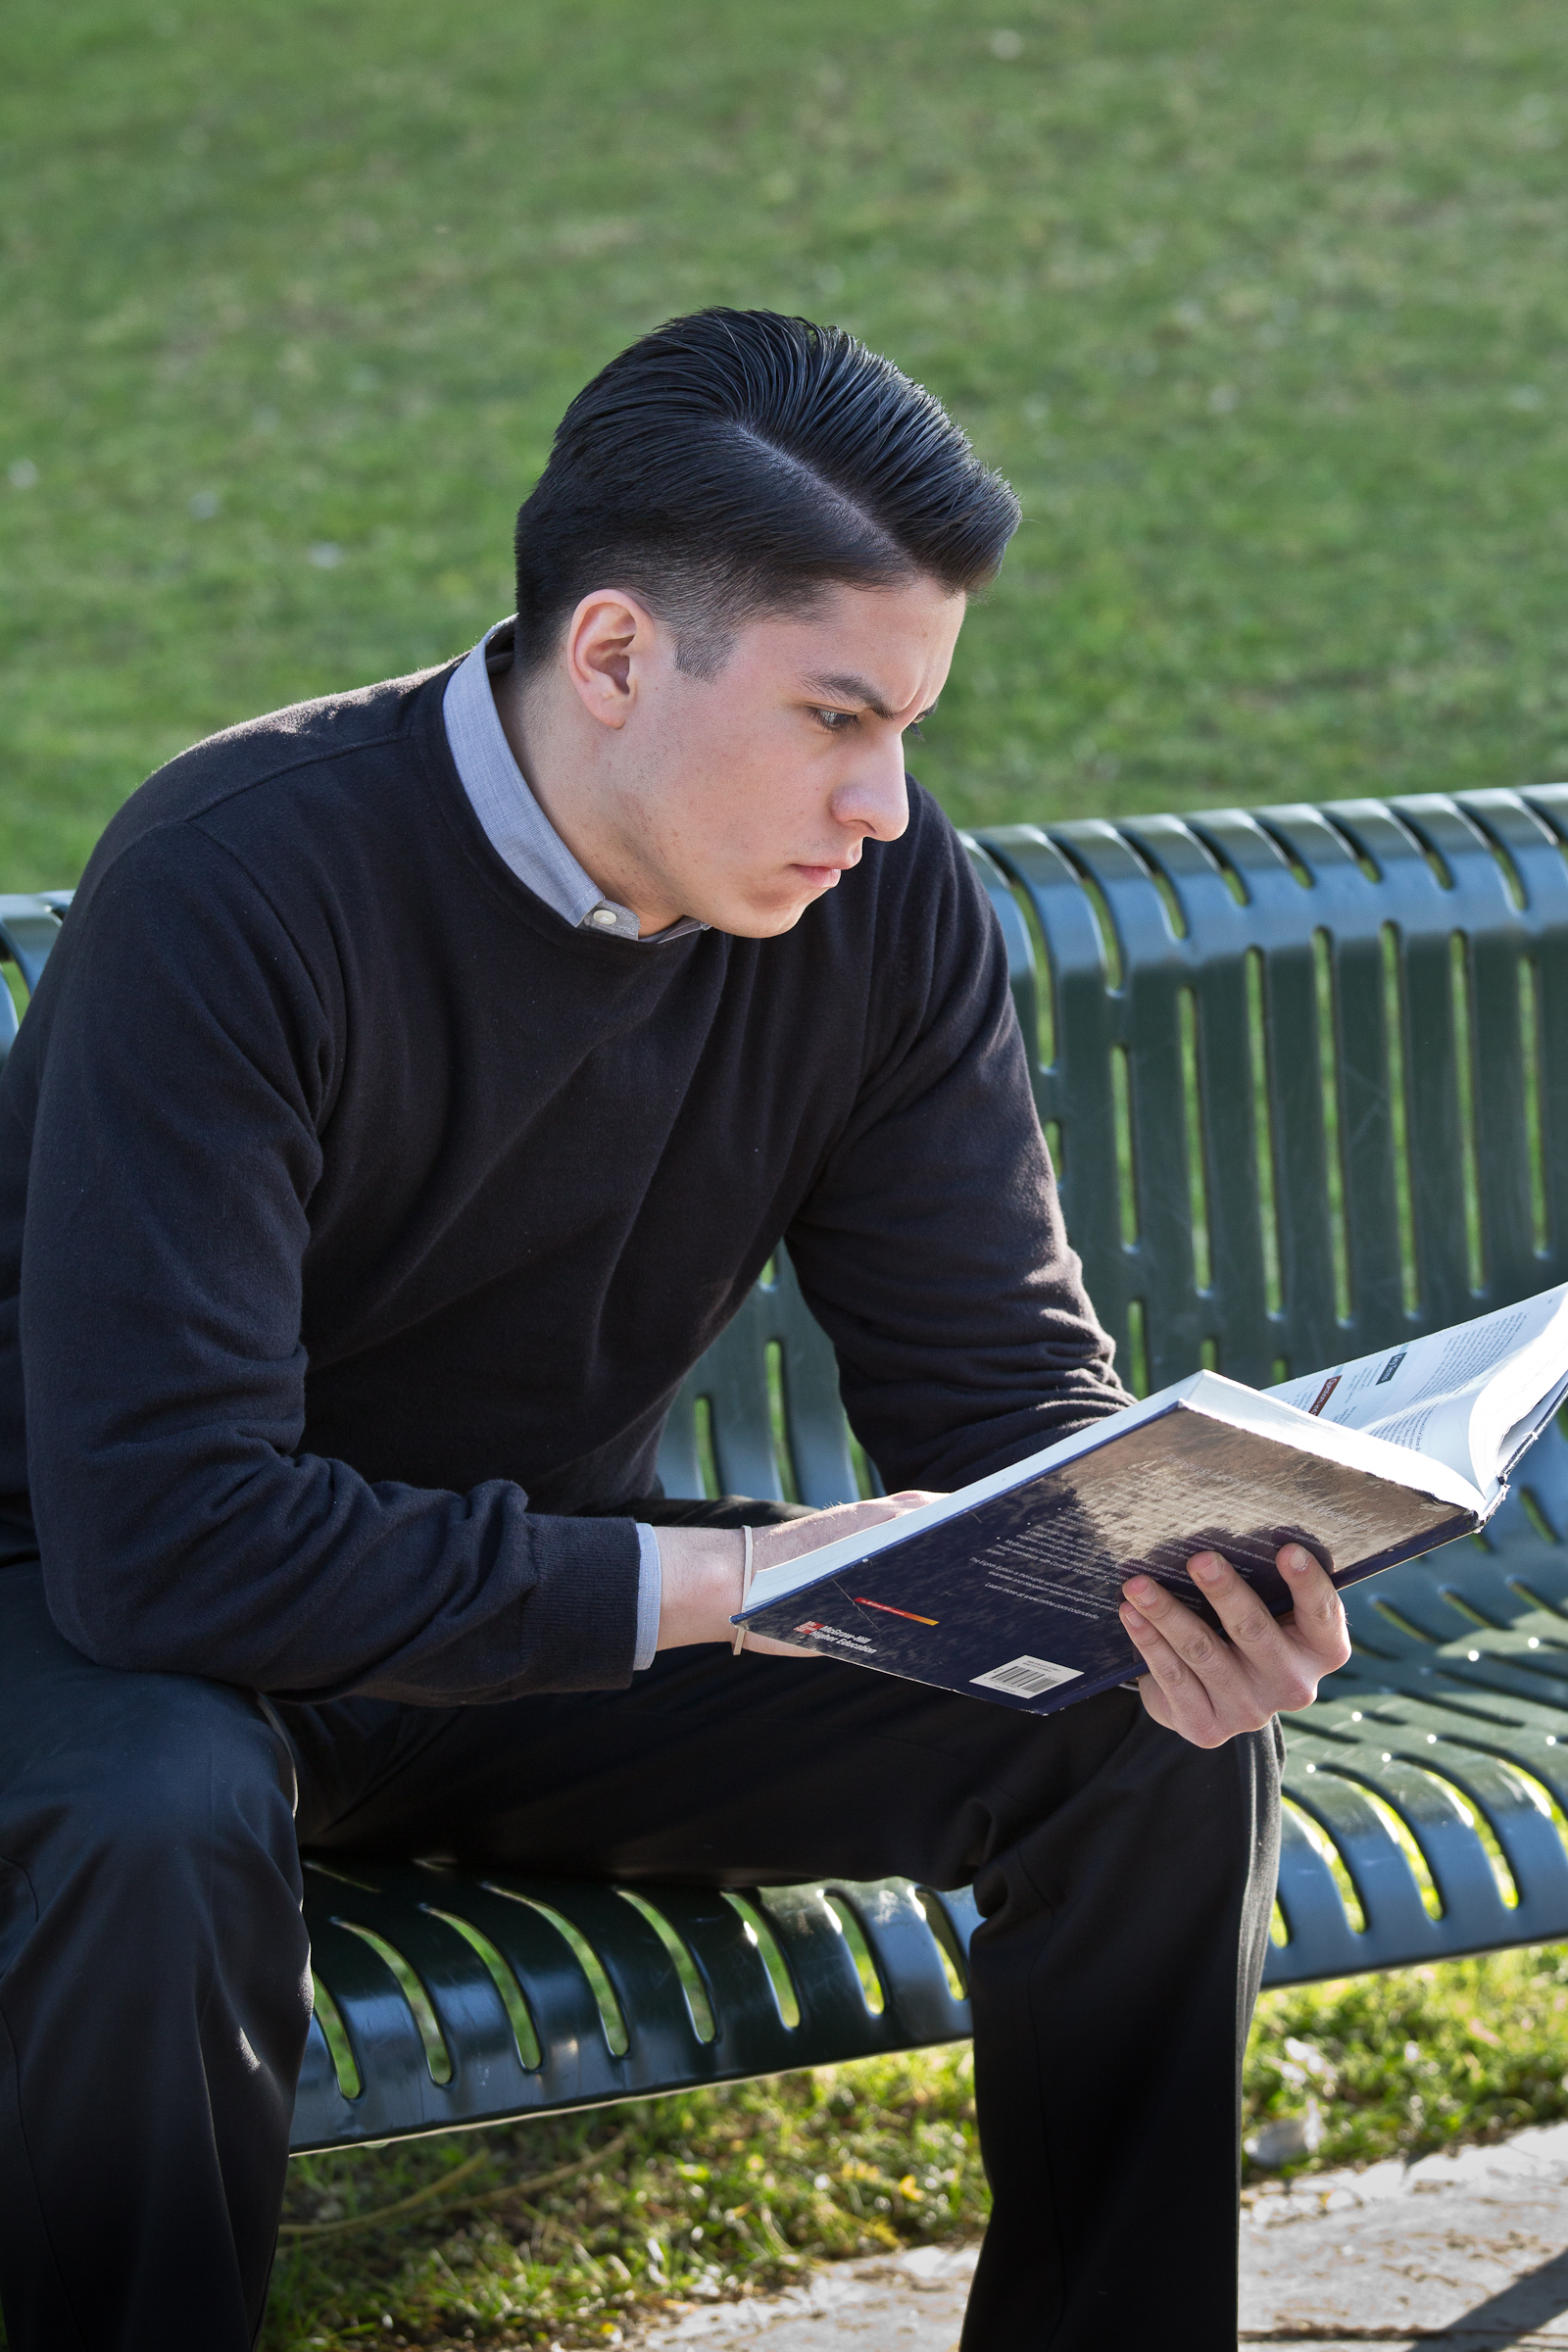 Student Reading while sitting on a bench